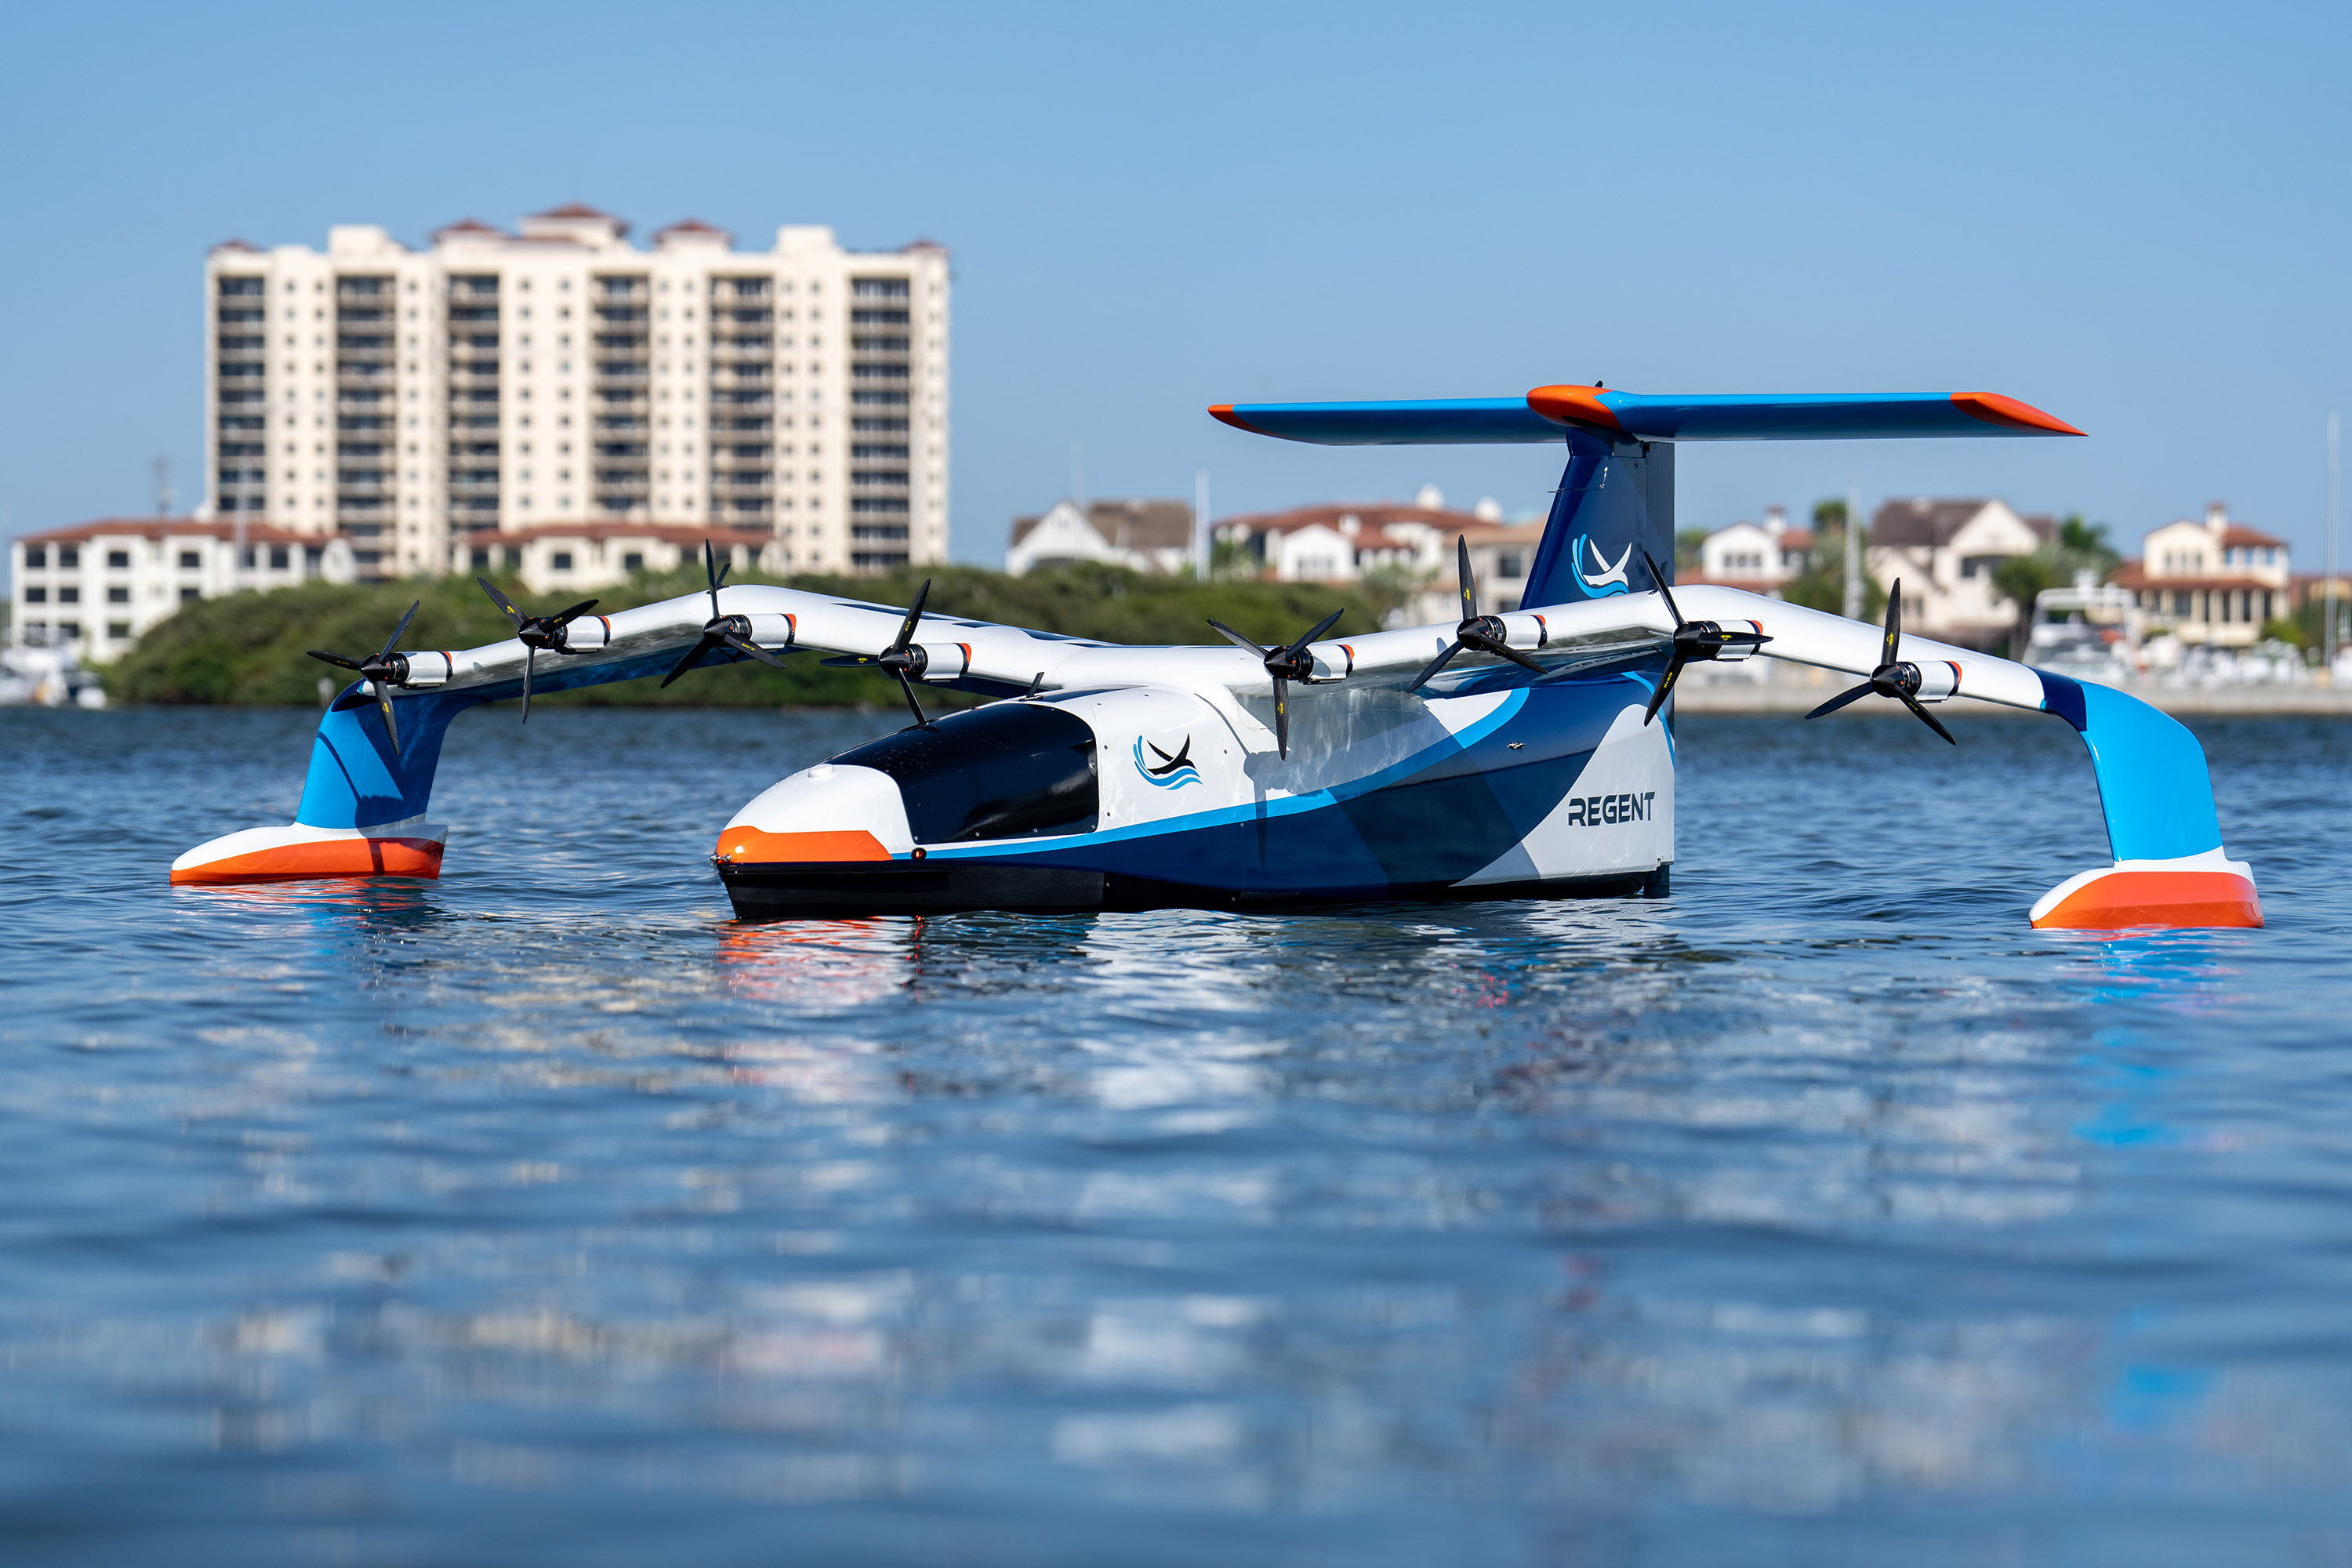 REGENT's seaglider prototype on the water during testing in Florida.